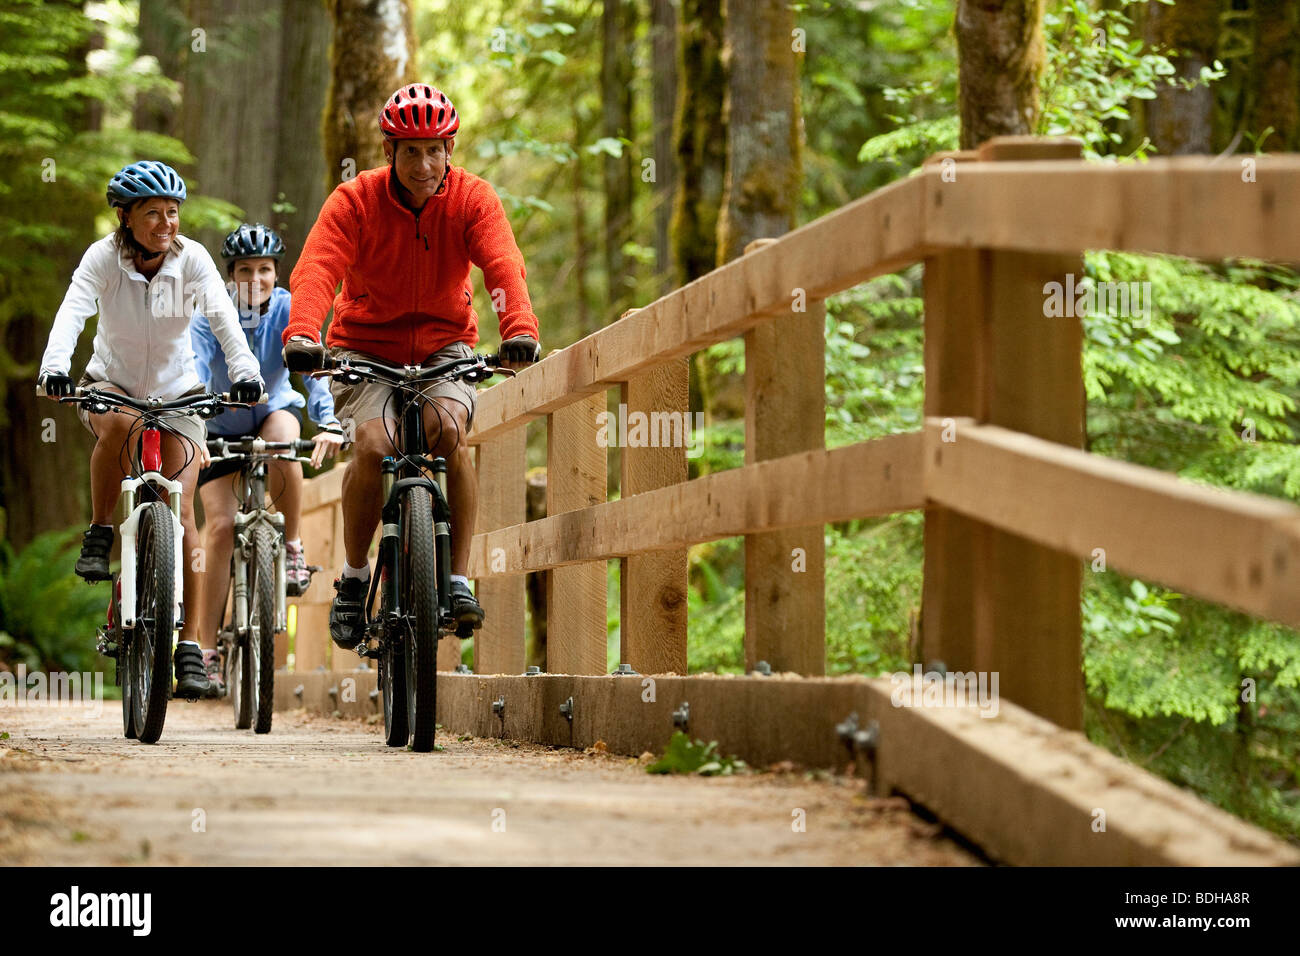 Three mountain bikers riding across a wooden bridge in a forest. Stock Photo